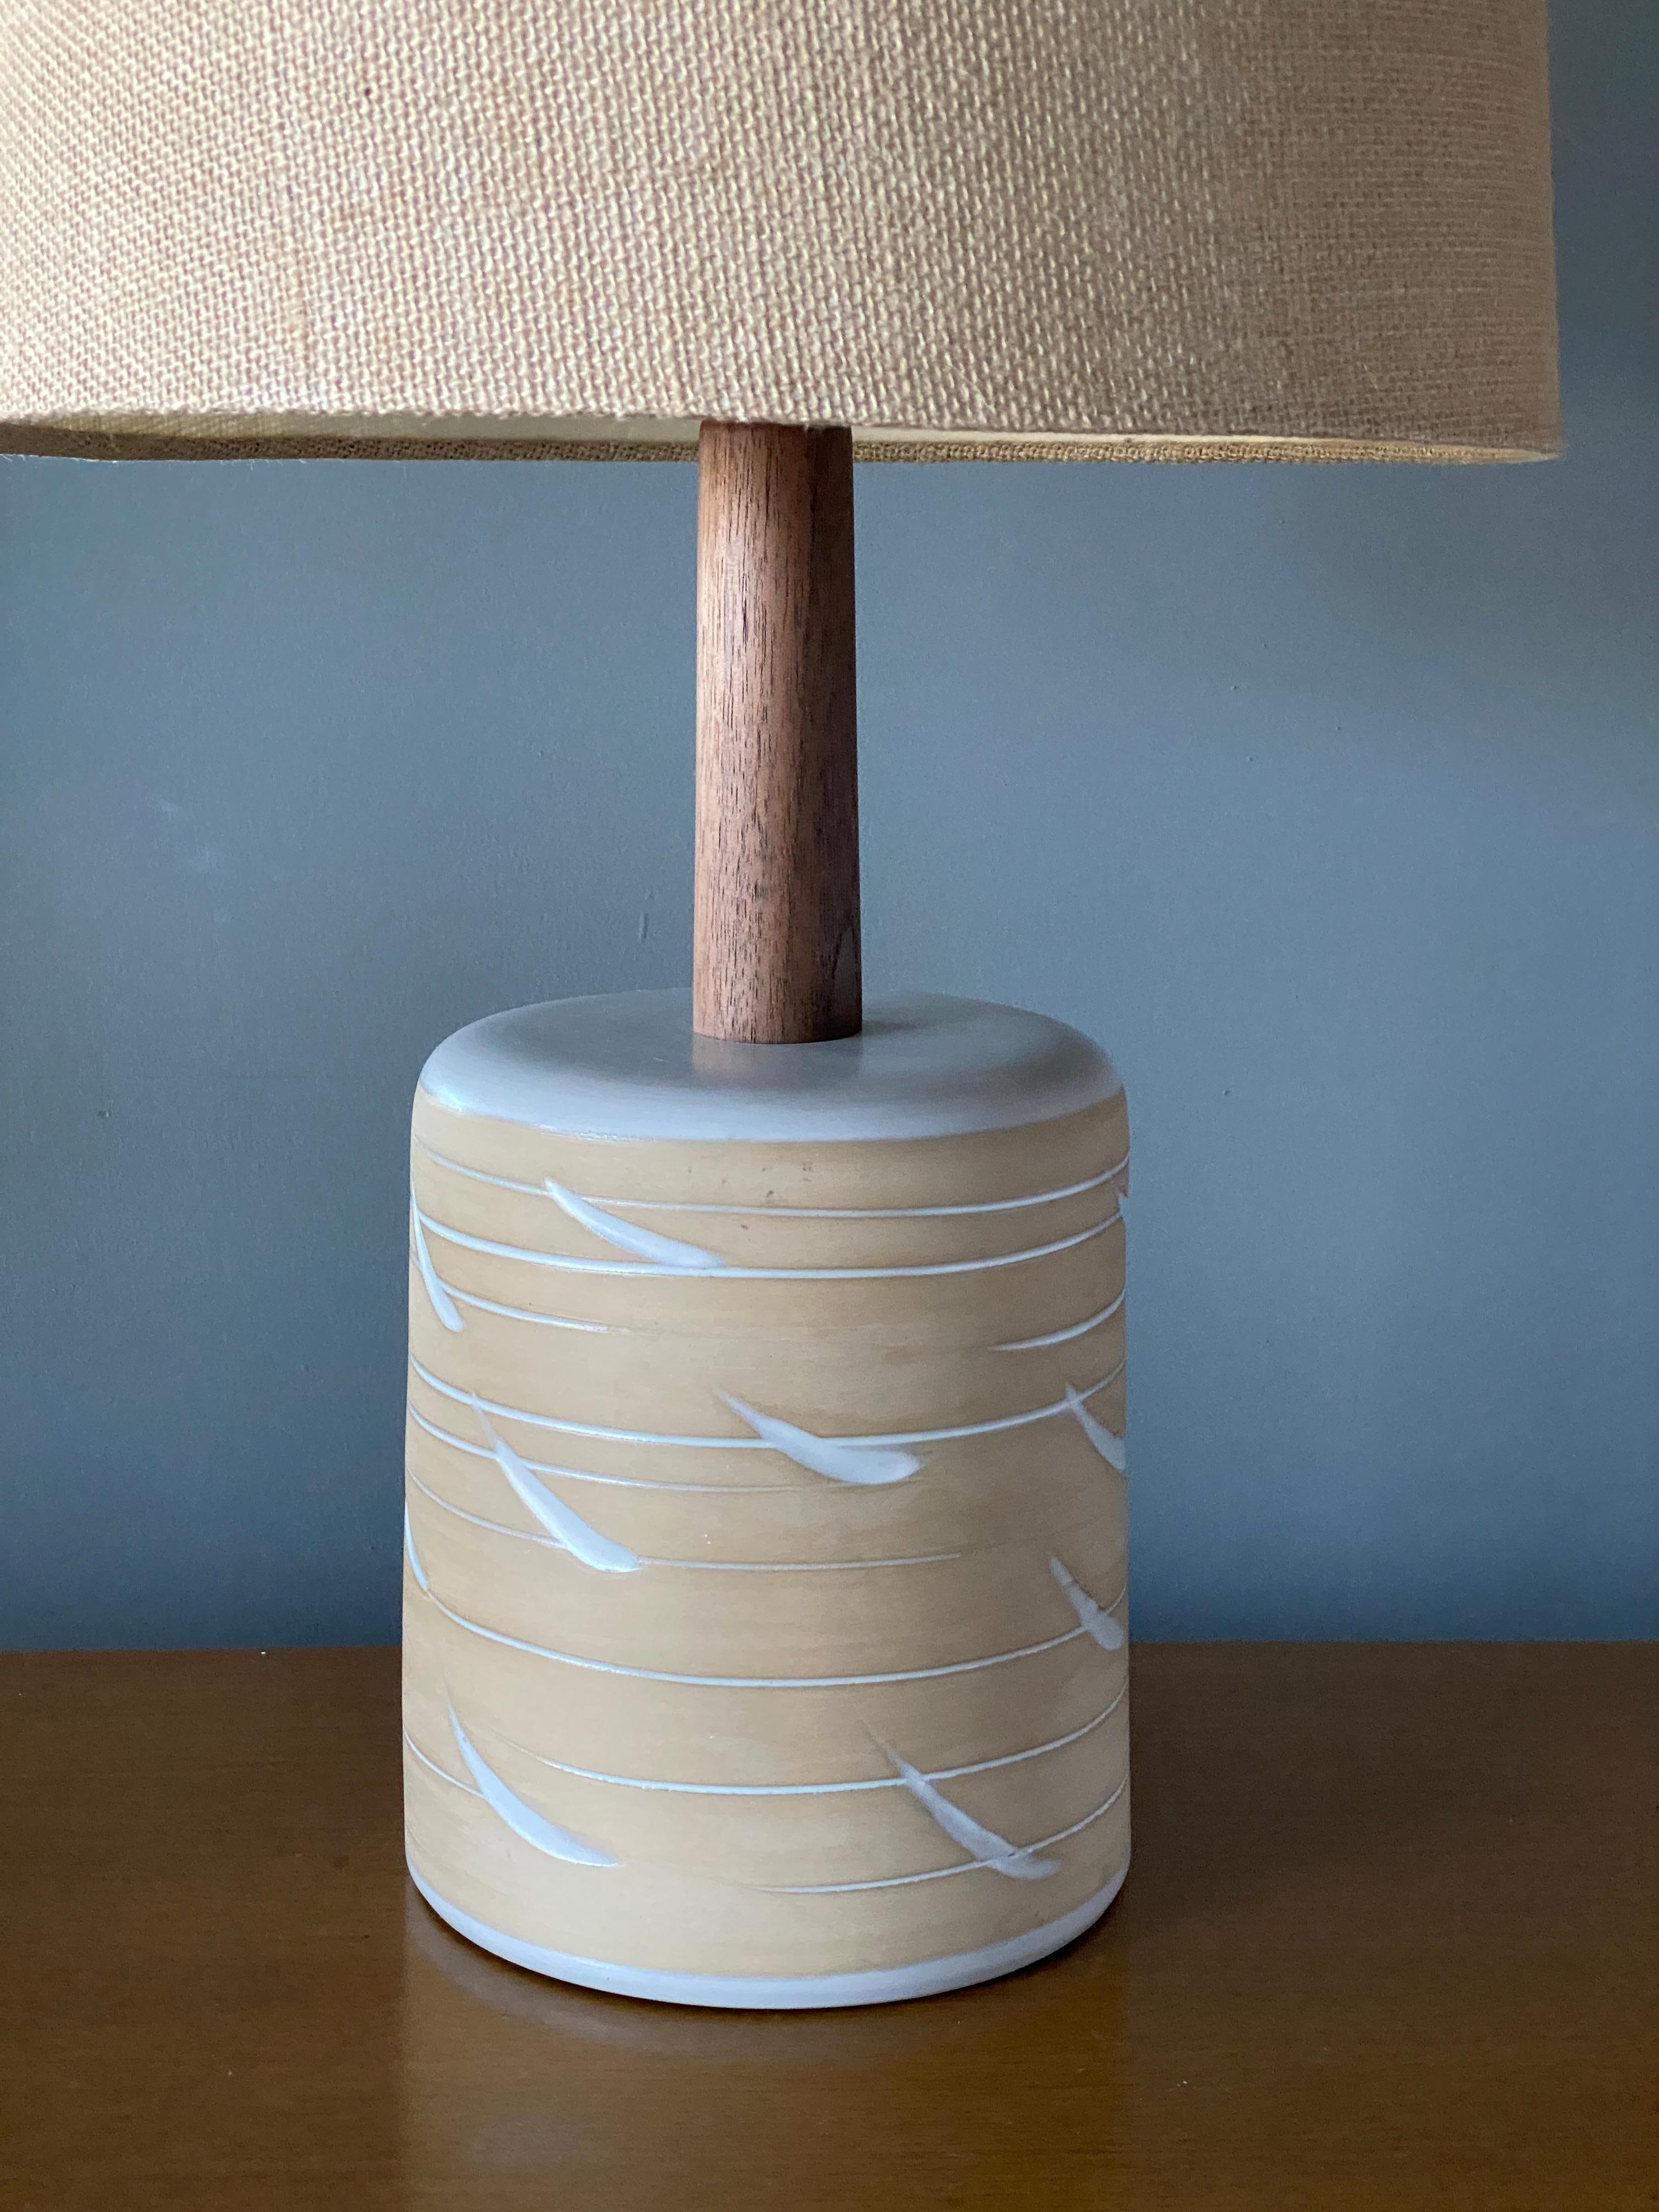 A pair of table lamps designed by husband and wife duo Jane & Gordon Martz. Produced by Marshall Studios, Indianapolis. 

The bases are slip-cast and then dipped into glaze and hand painted. Design also incorporates exquisite walnut necks and